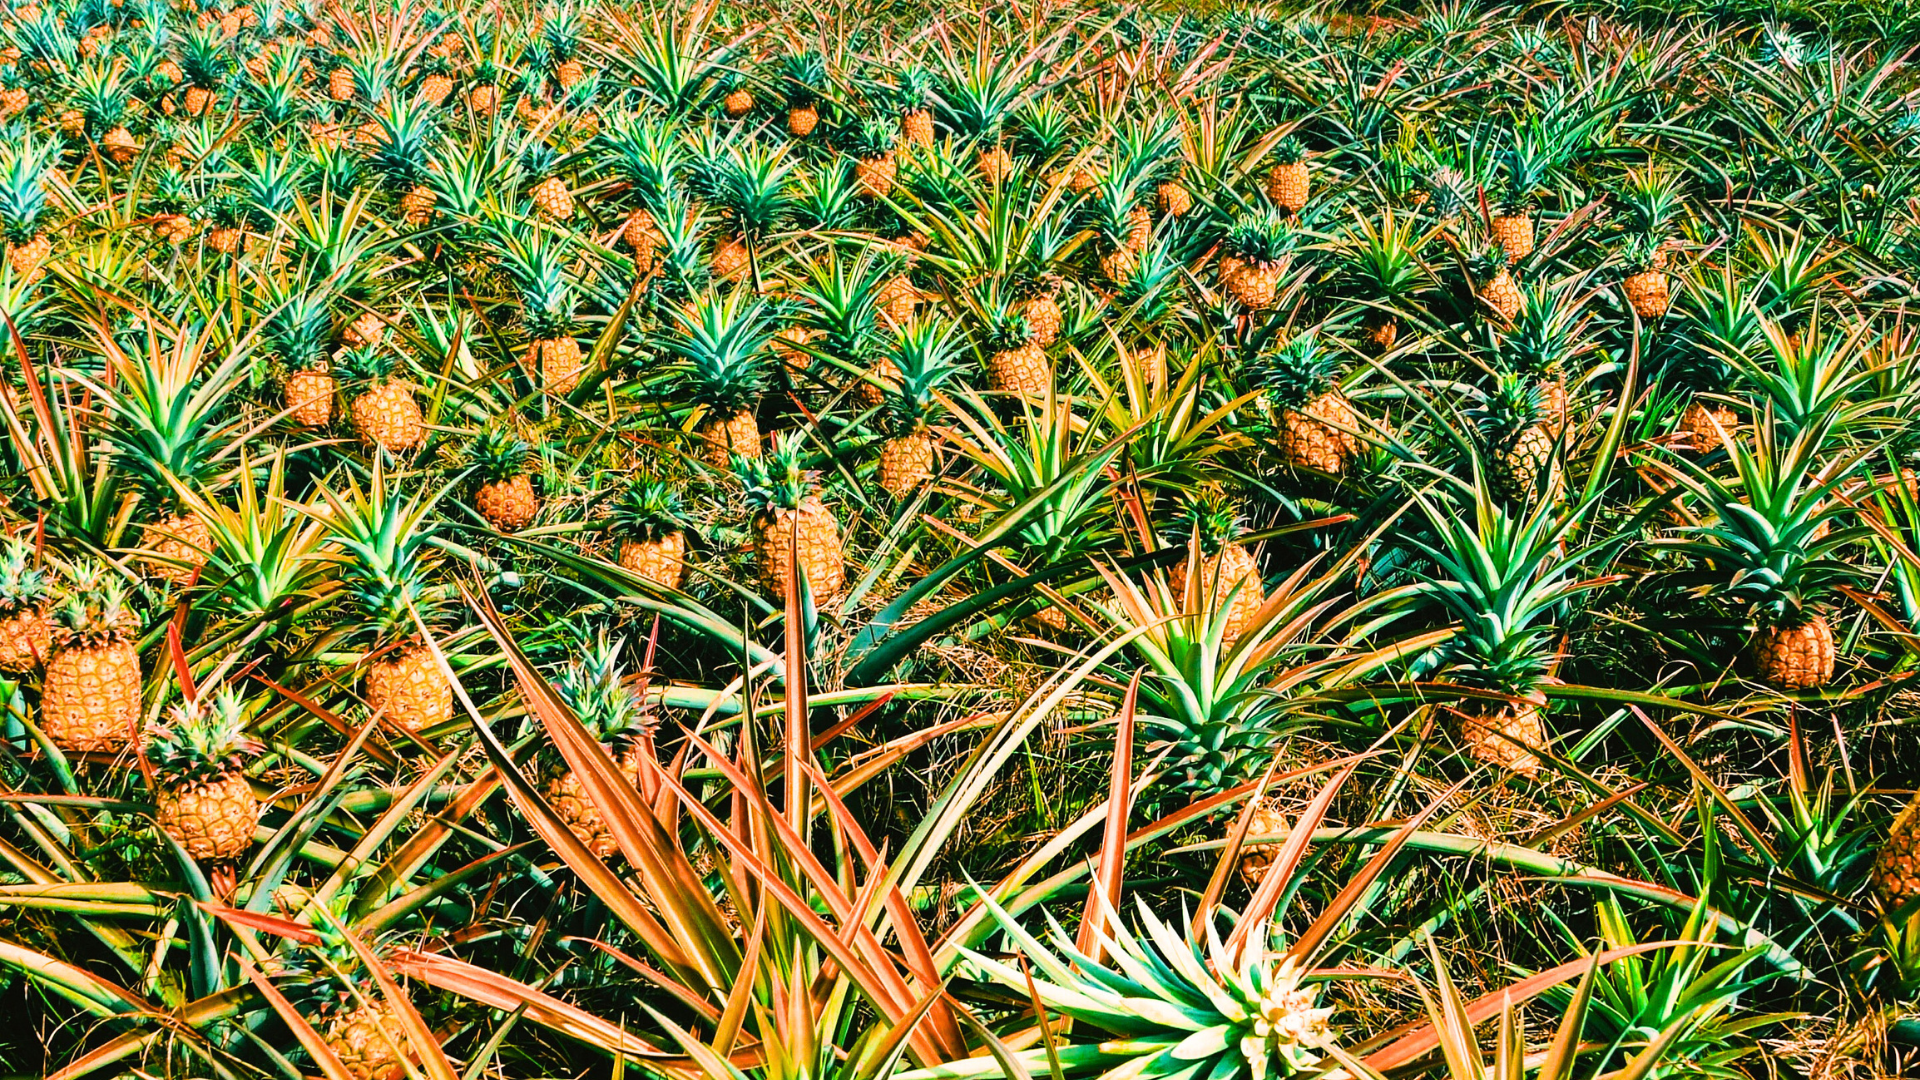 growing pineapples. pineapple cultivation, rows of pineapple plants